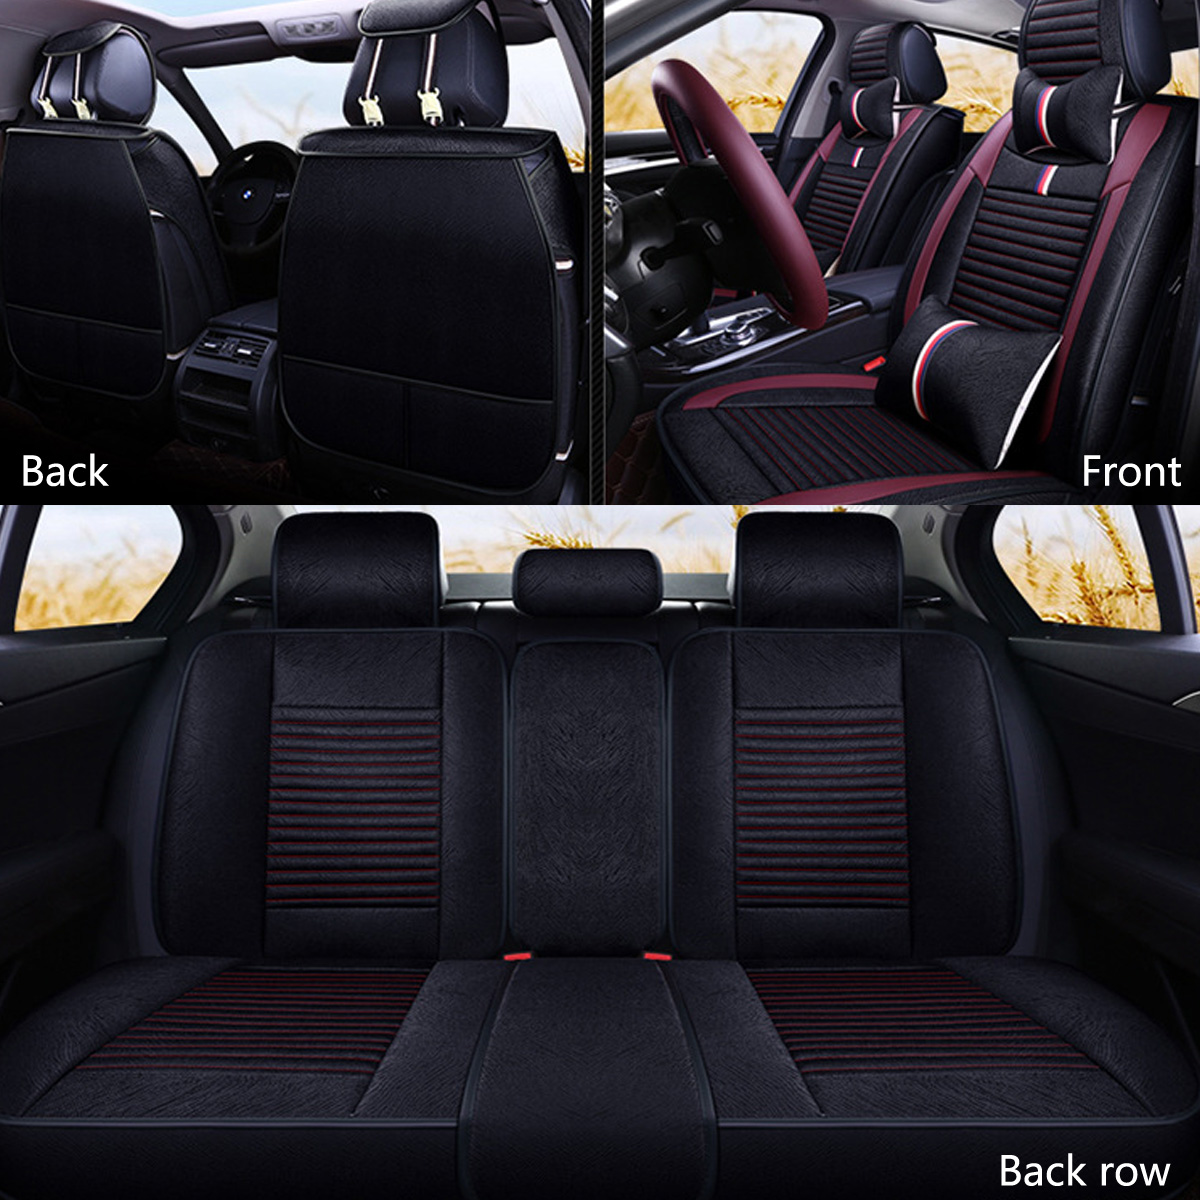 12Pcs-Luxury-5-Seat-Car-Seat-Cover-Front-Rear-with-Pillow-Waist-Cushion-Black-Red-1339785